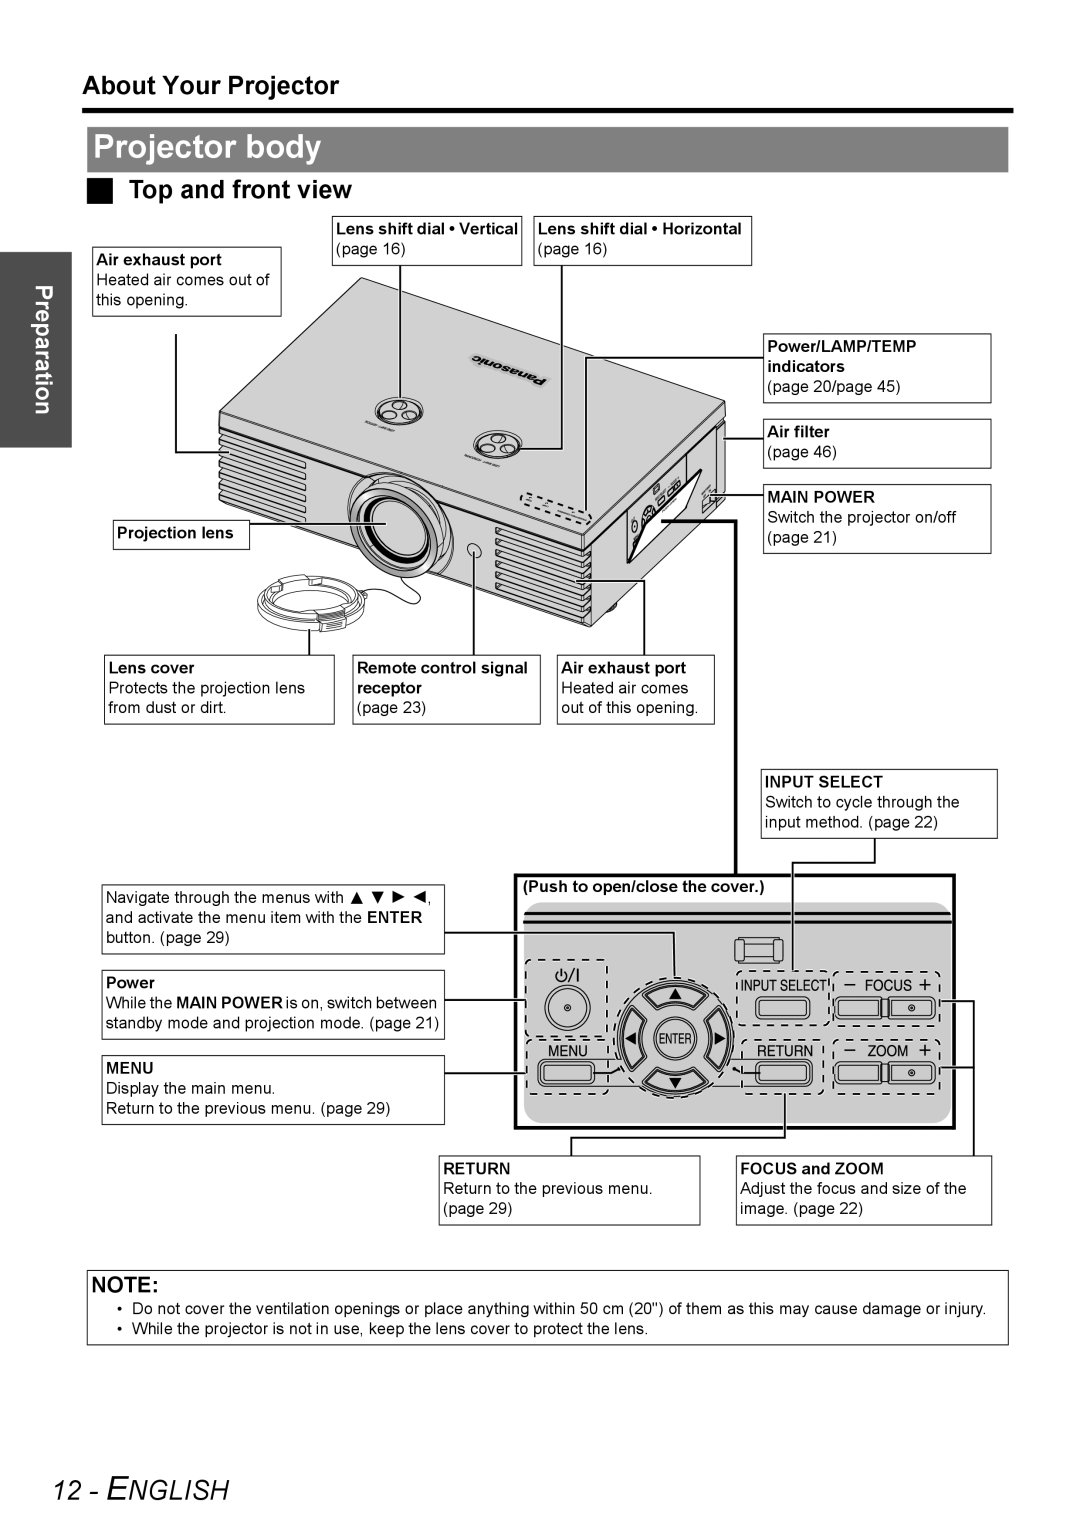 Panasonic PT-AE3000E manual Projector body, English, About Your Projector, Top and front view, Preparation 